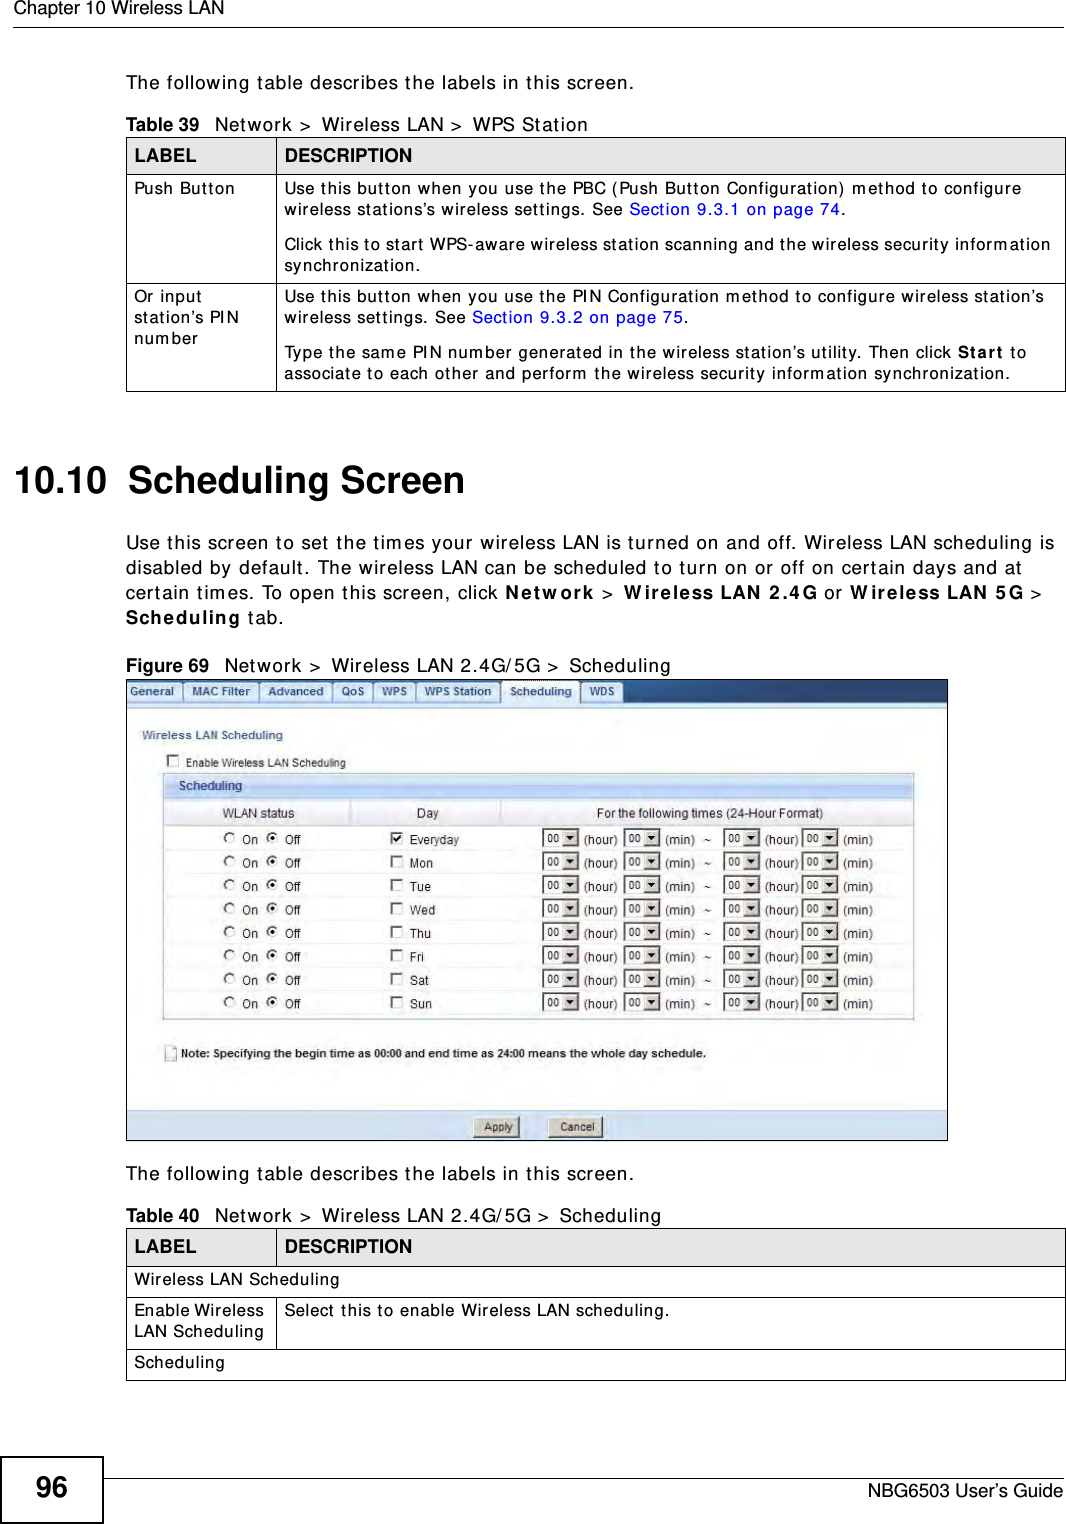 Chapter 10 Wireless LANNBG6503 User’s Guide96The following table describes the labels in this screen.10.10  Scheduling ScreenUse this screen to set the times your wireless LAN is turned on and off. Wireless LAN scheduling is disabled by default. The wireless LAN can be scheduled to turn on or off on certain days and at certain times. To open this screen, click Network &gt; Wireless LAN 2.4G or Wireless LAN 5G &gt; Scheduling tab.Figure 69   Network &gt; Wireless LAN 2.4G/5G &gt; SchedulingThe following table describes the labels in this screen.Table 39   Network &gt; Wireless LAN &gt; WPS StationLABEL DESCRIPTIONPush Button Use this button when you use the PBC (Push Button Configuration) method to configure wireless stations’s wireless settings. See Section 9.3.1 on page 74.Click this to start WPS-aware wireless station scanning and the wireless security information synchronization. Or input station’s PIN numberUse this button when you use the PIN Configuration method to configure wireless station’s wireless settings. See Section 9.3.2 on page 75.Type the same PIN number generated in the wireless station’s utility. Then click Start to associate to each other and perform the wireless security information synchronization. Table 40   Network &gt; Wireless LAN 2.4G/5G &gt; SchedulingLABEL DESCRIPTIONWireless LAN SchedulingEnable Wireless LAN Scheduling Select this to enable Wireless LAN scheduling.Scheduling